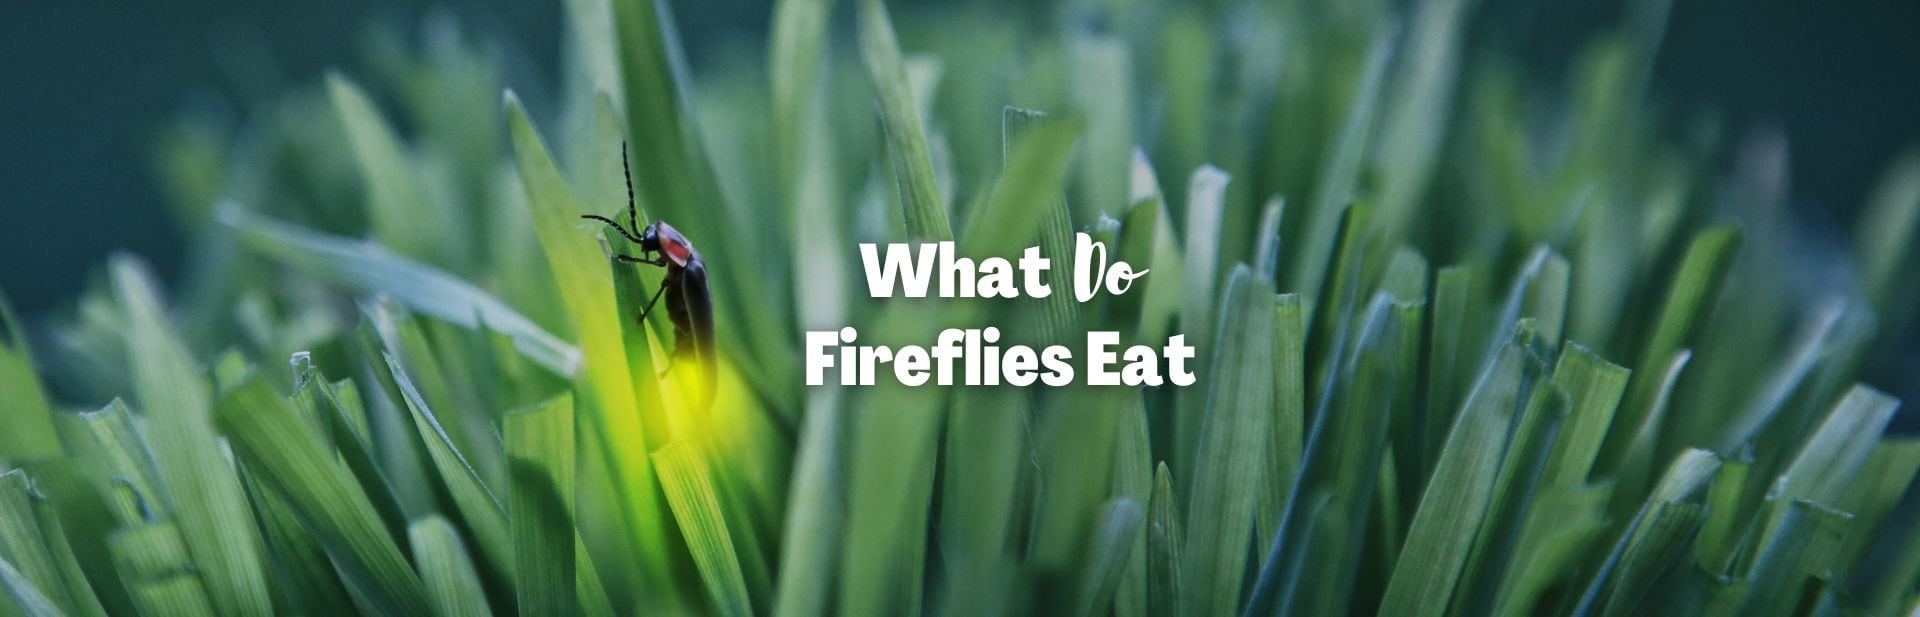 Get that Glow! What Do Fireflies Eat? + Many Other Enlightening Facts